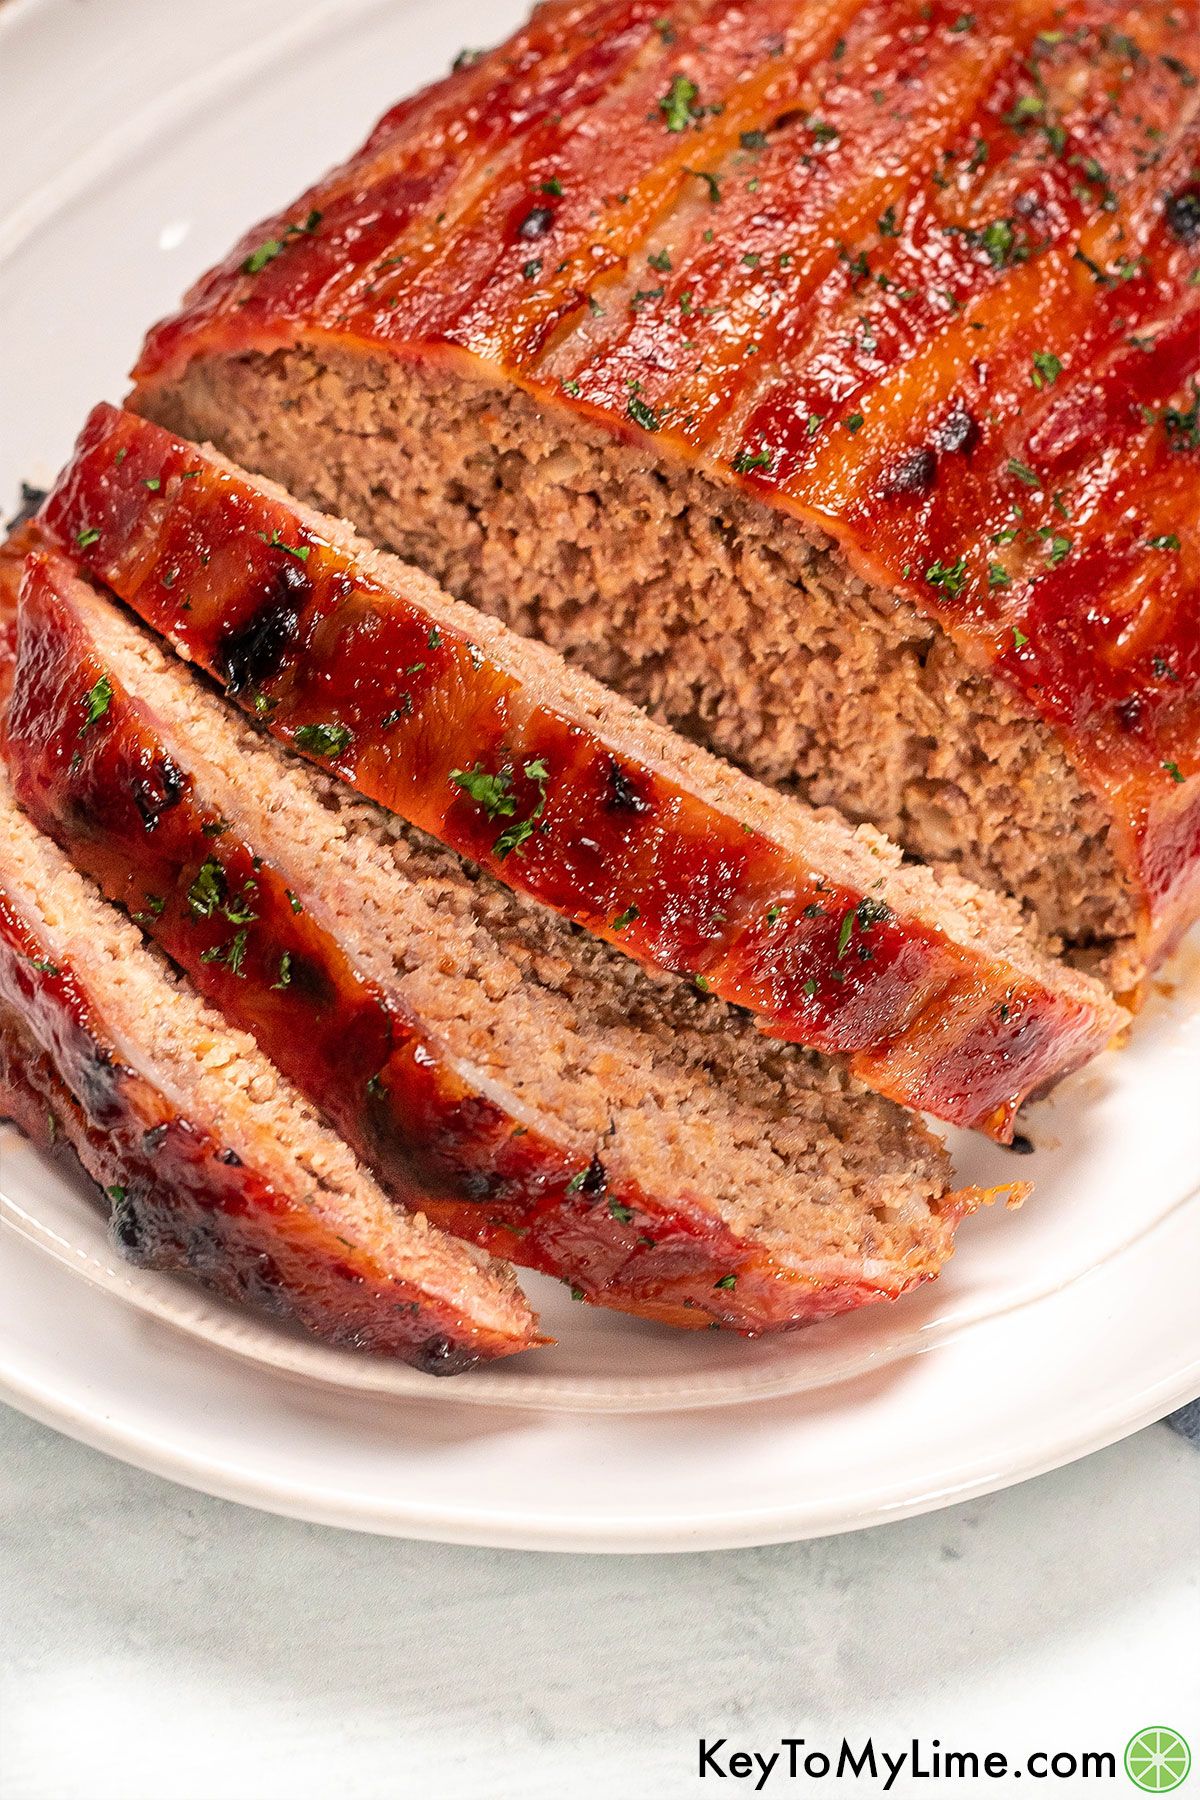 A close-up image showing the glaze of the meatloaf on top of a large white platter.